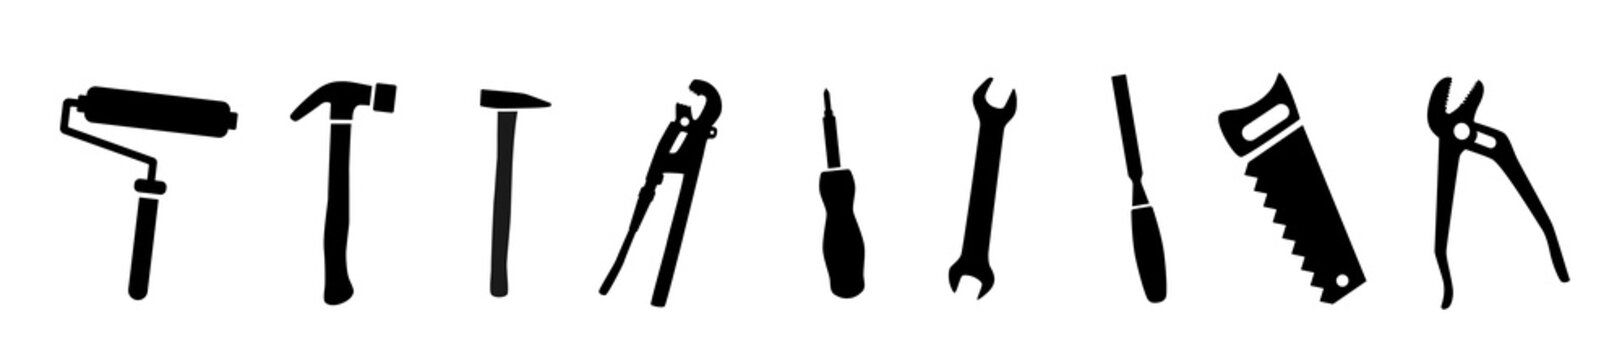 Household tools set. Tools for repair and construction. Black flat icons. Vector set isolated on white background.